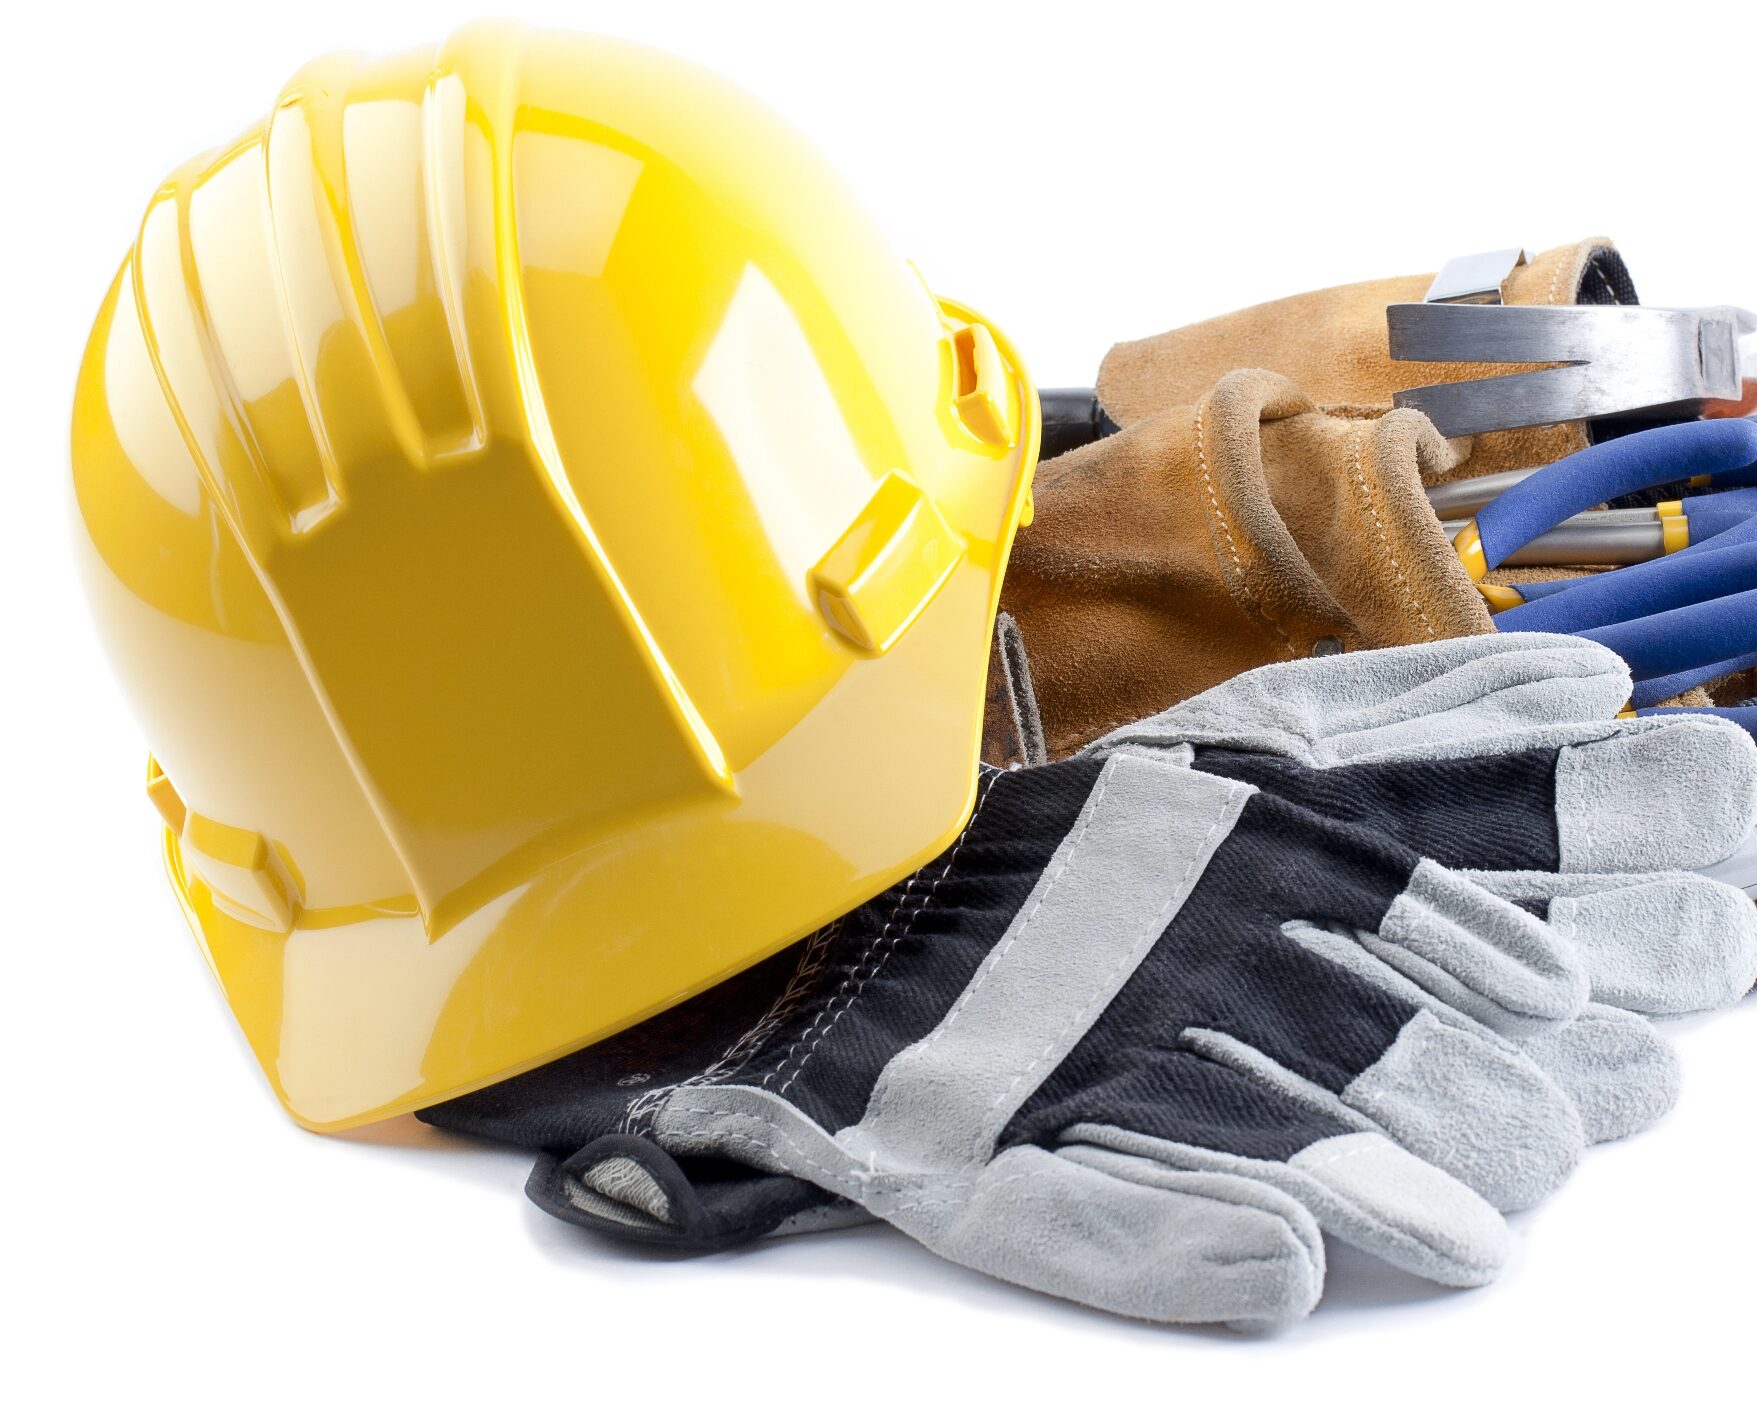 Construction hard hat, gloves and tool belt